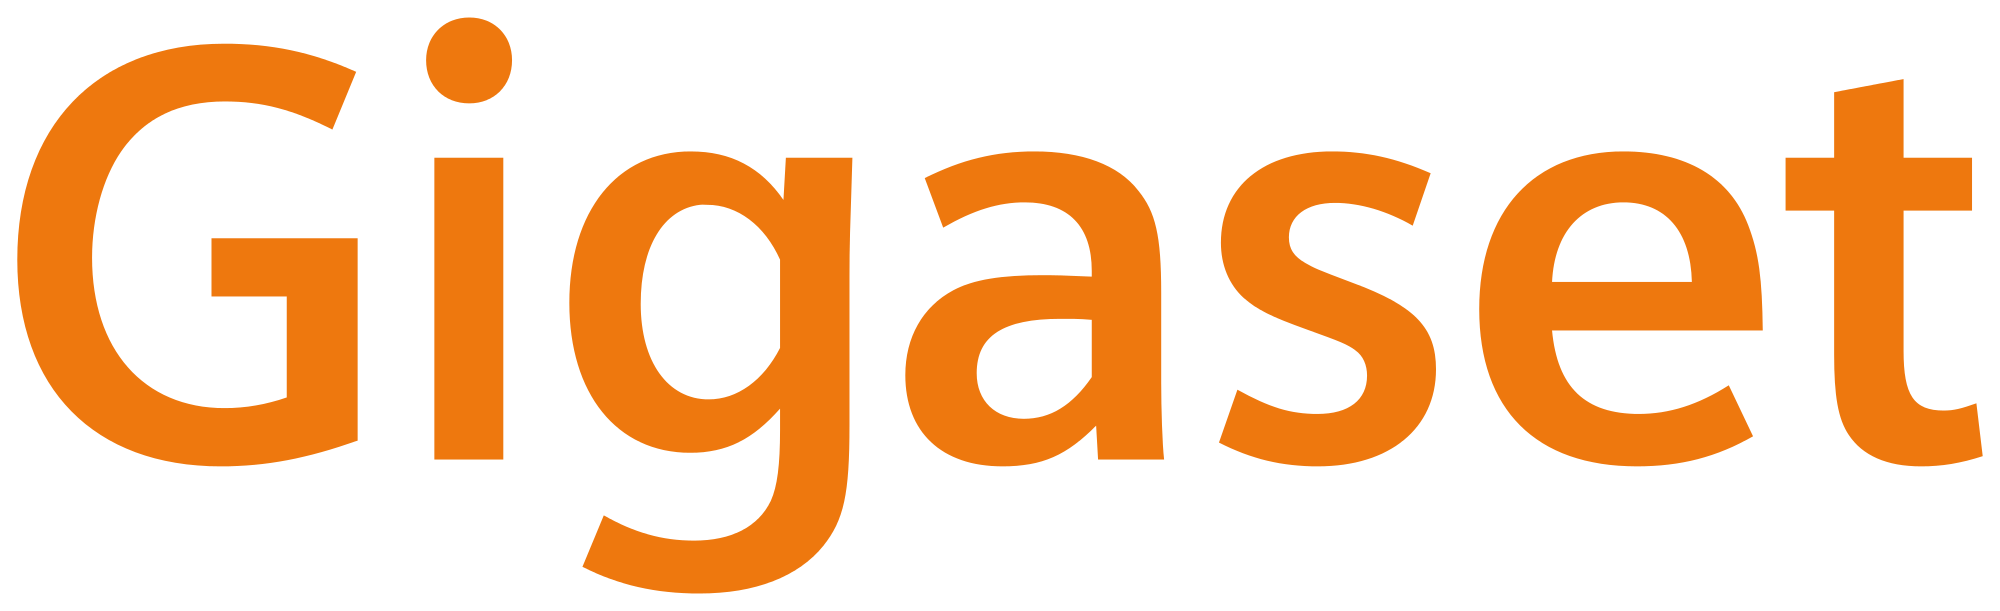 Gigaset Communications GmbH - Siemens Home and Office Communication Devices